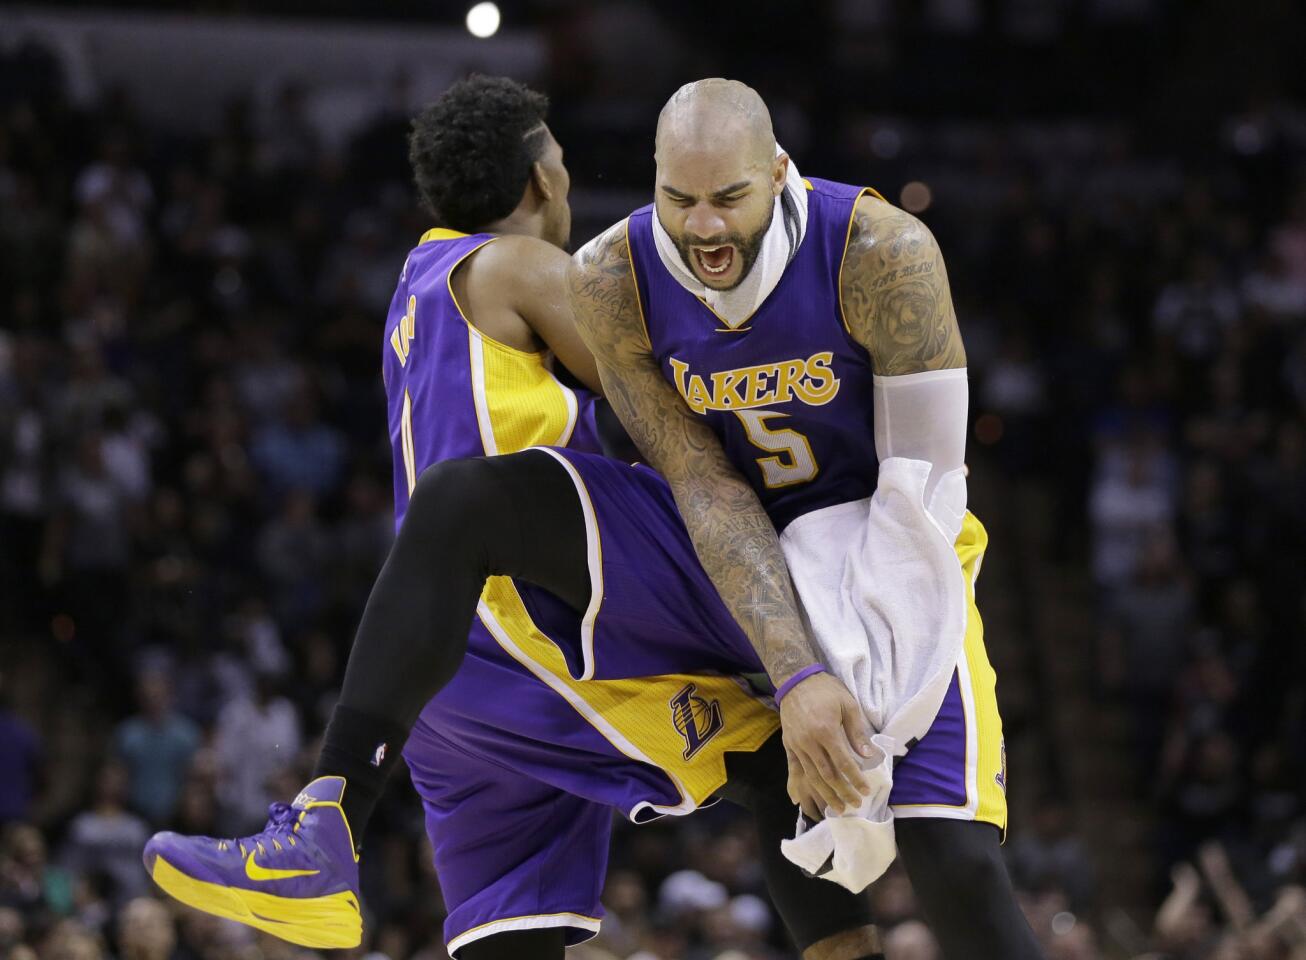 Lakers power forward Carlos Boozer (5) celebrates with teammate Nick Young after he made what proved to be the game-winning three-pointer against the Spurs with seven seconds left in overtime on Friday night in San Antonio.